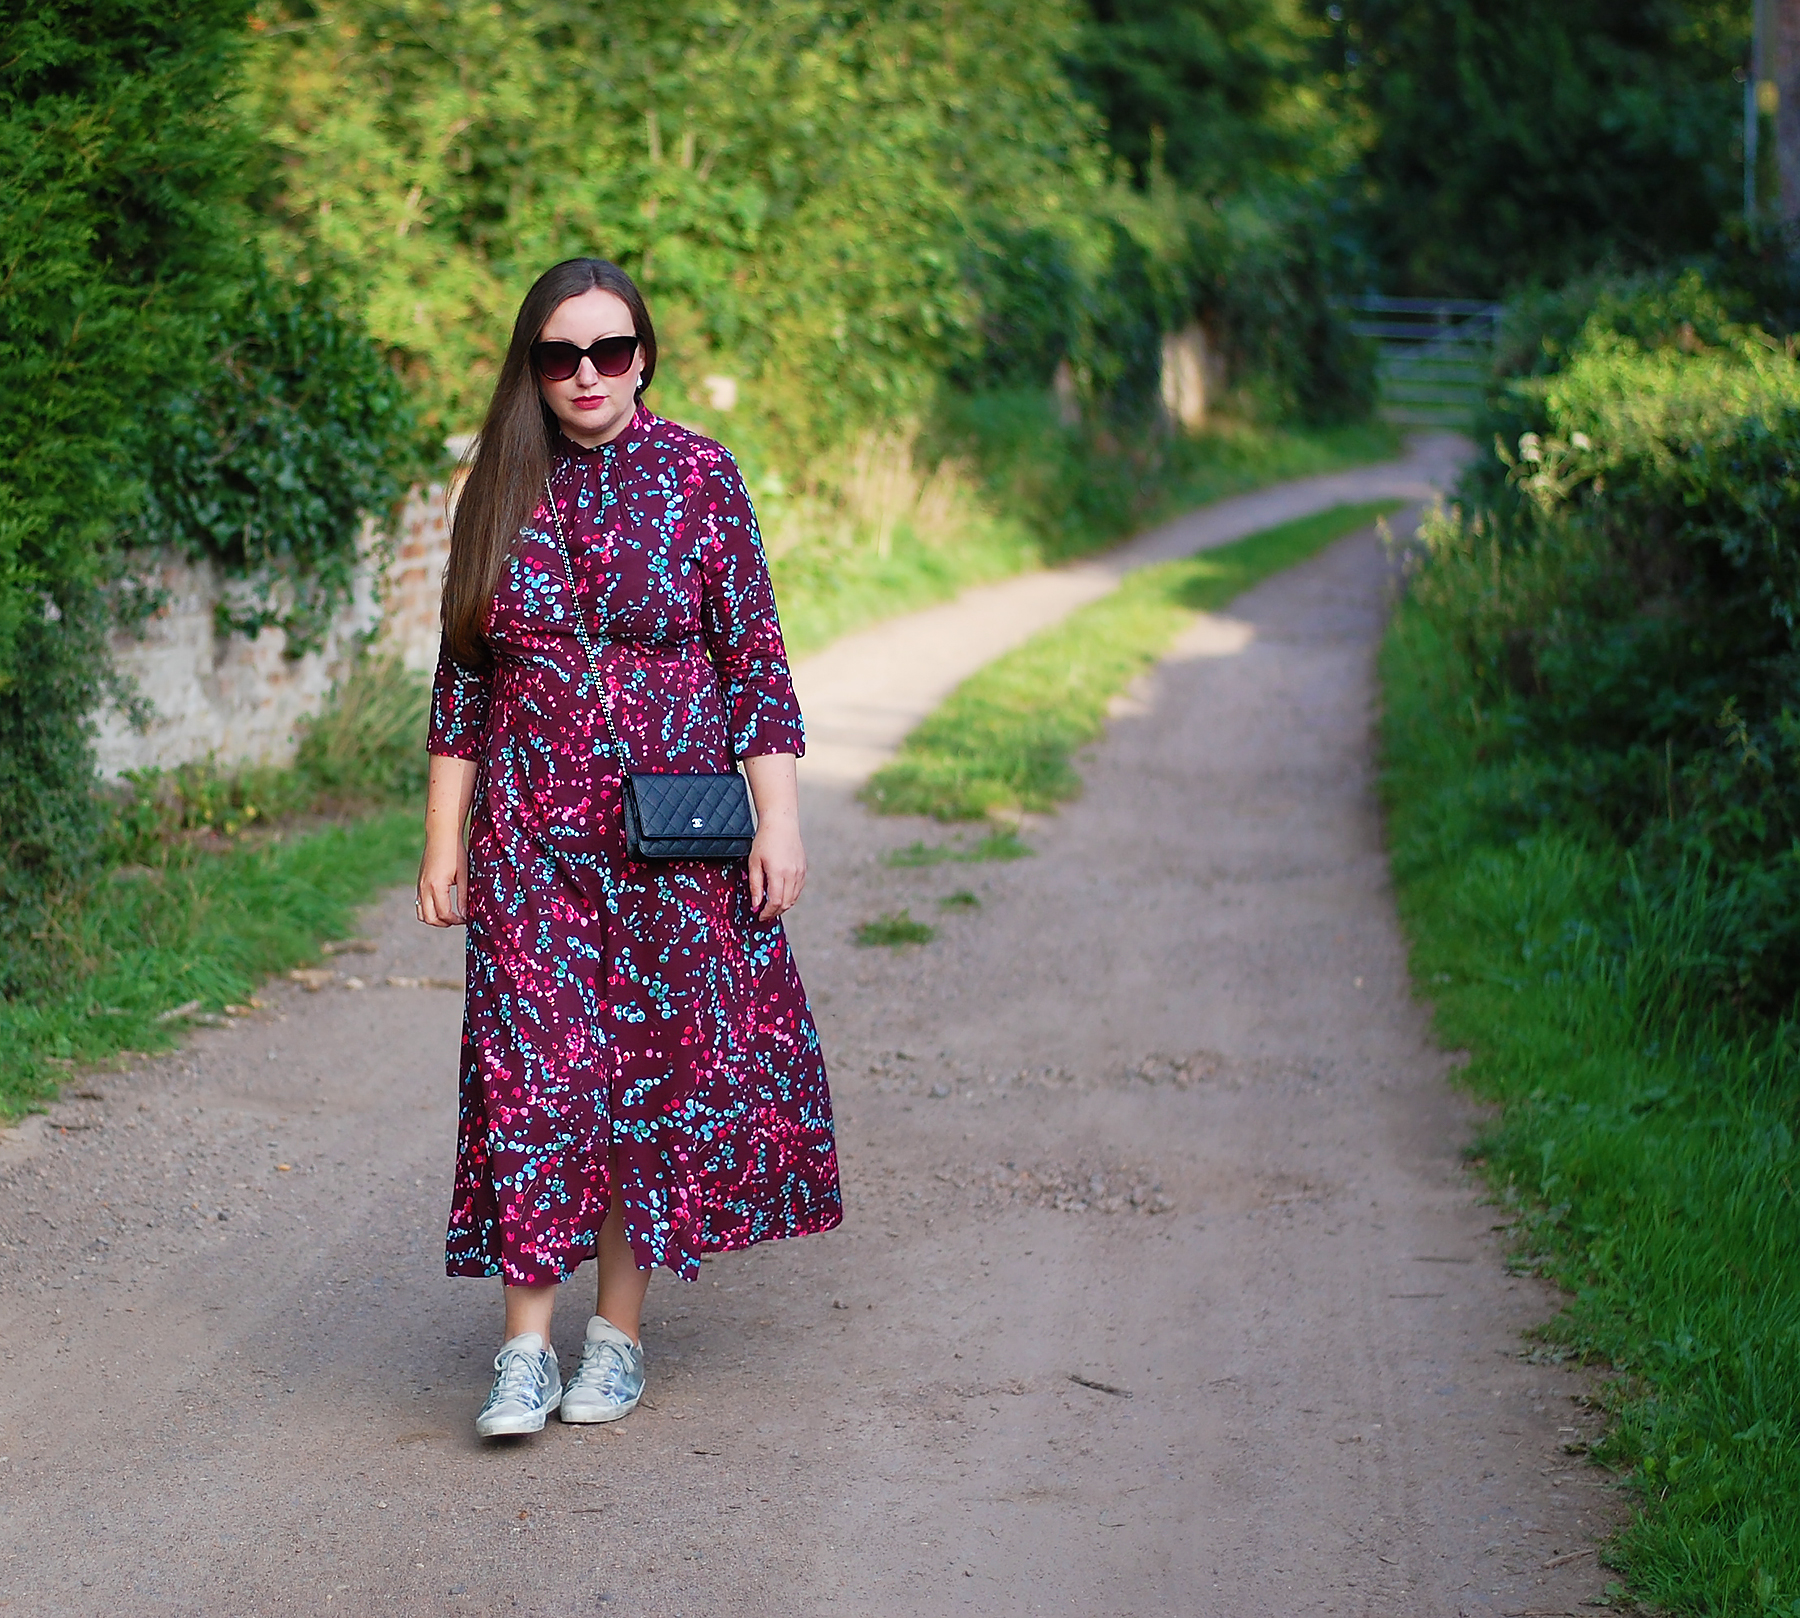 Berry Tone Midi Dress Outfit